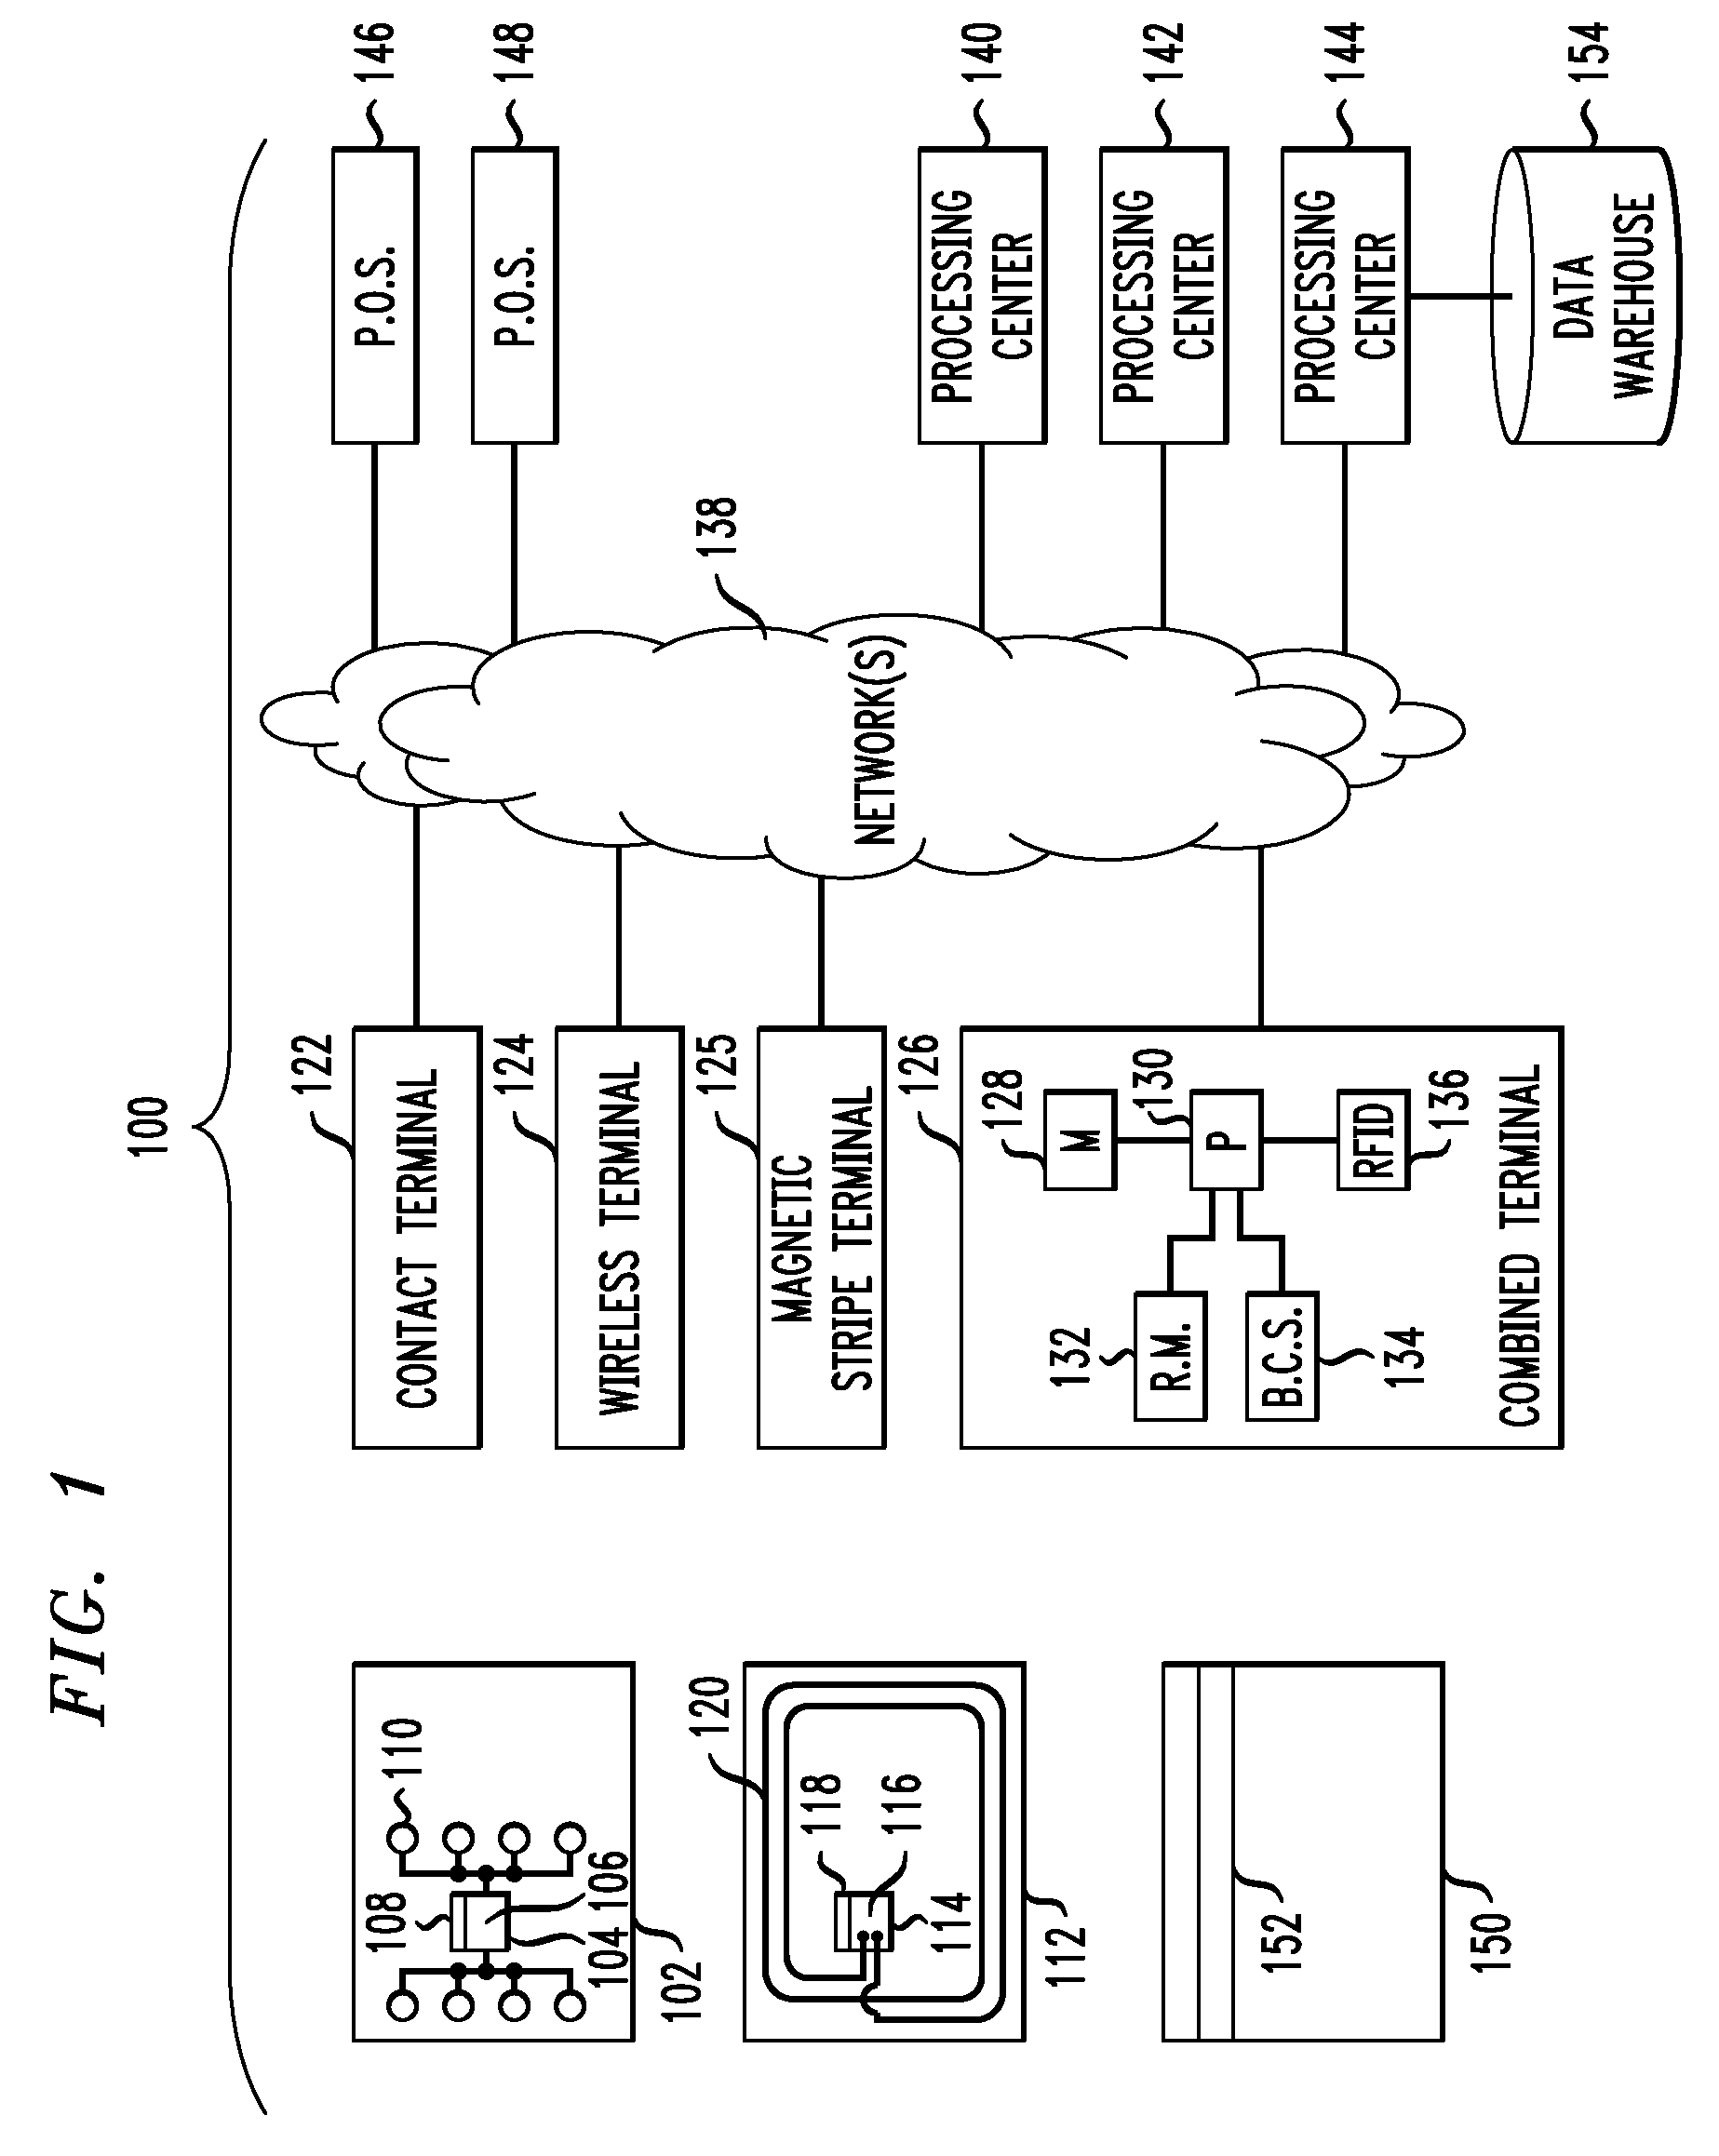 Apparatus And Method For Payment Card Account Personalization